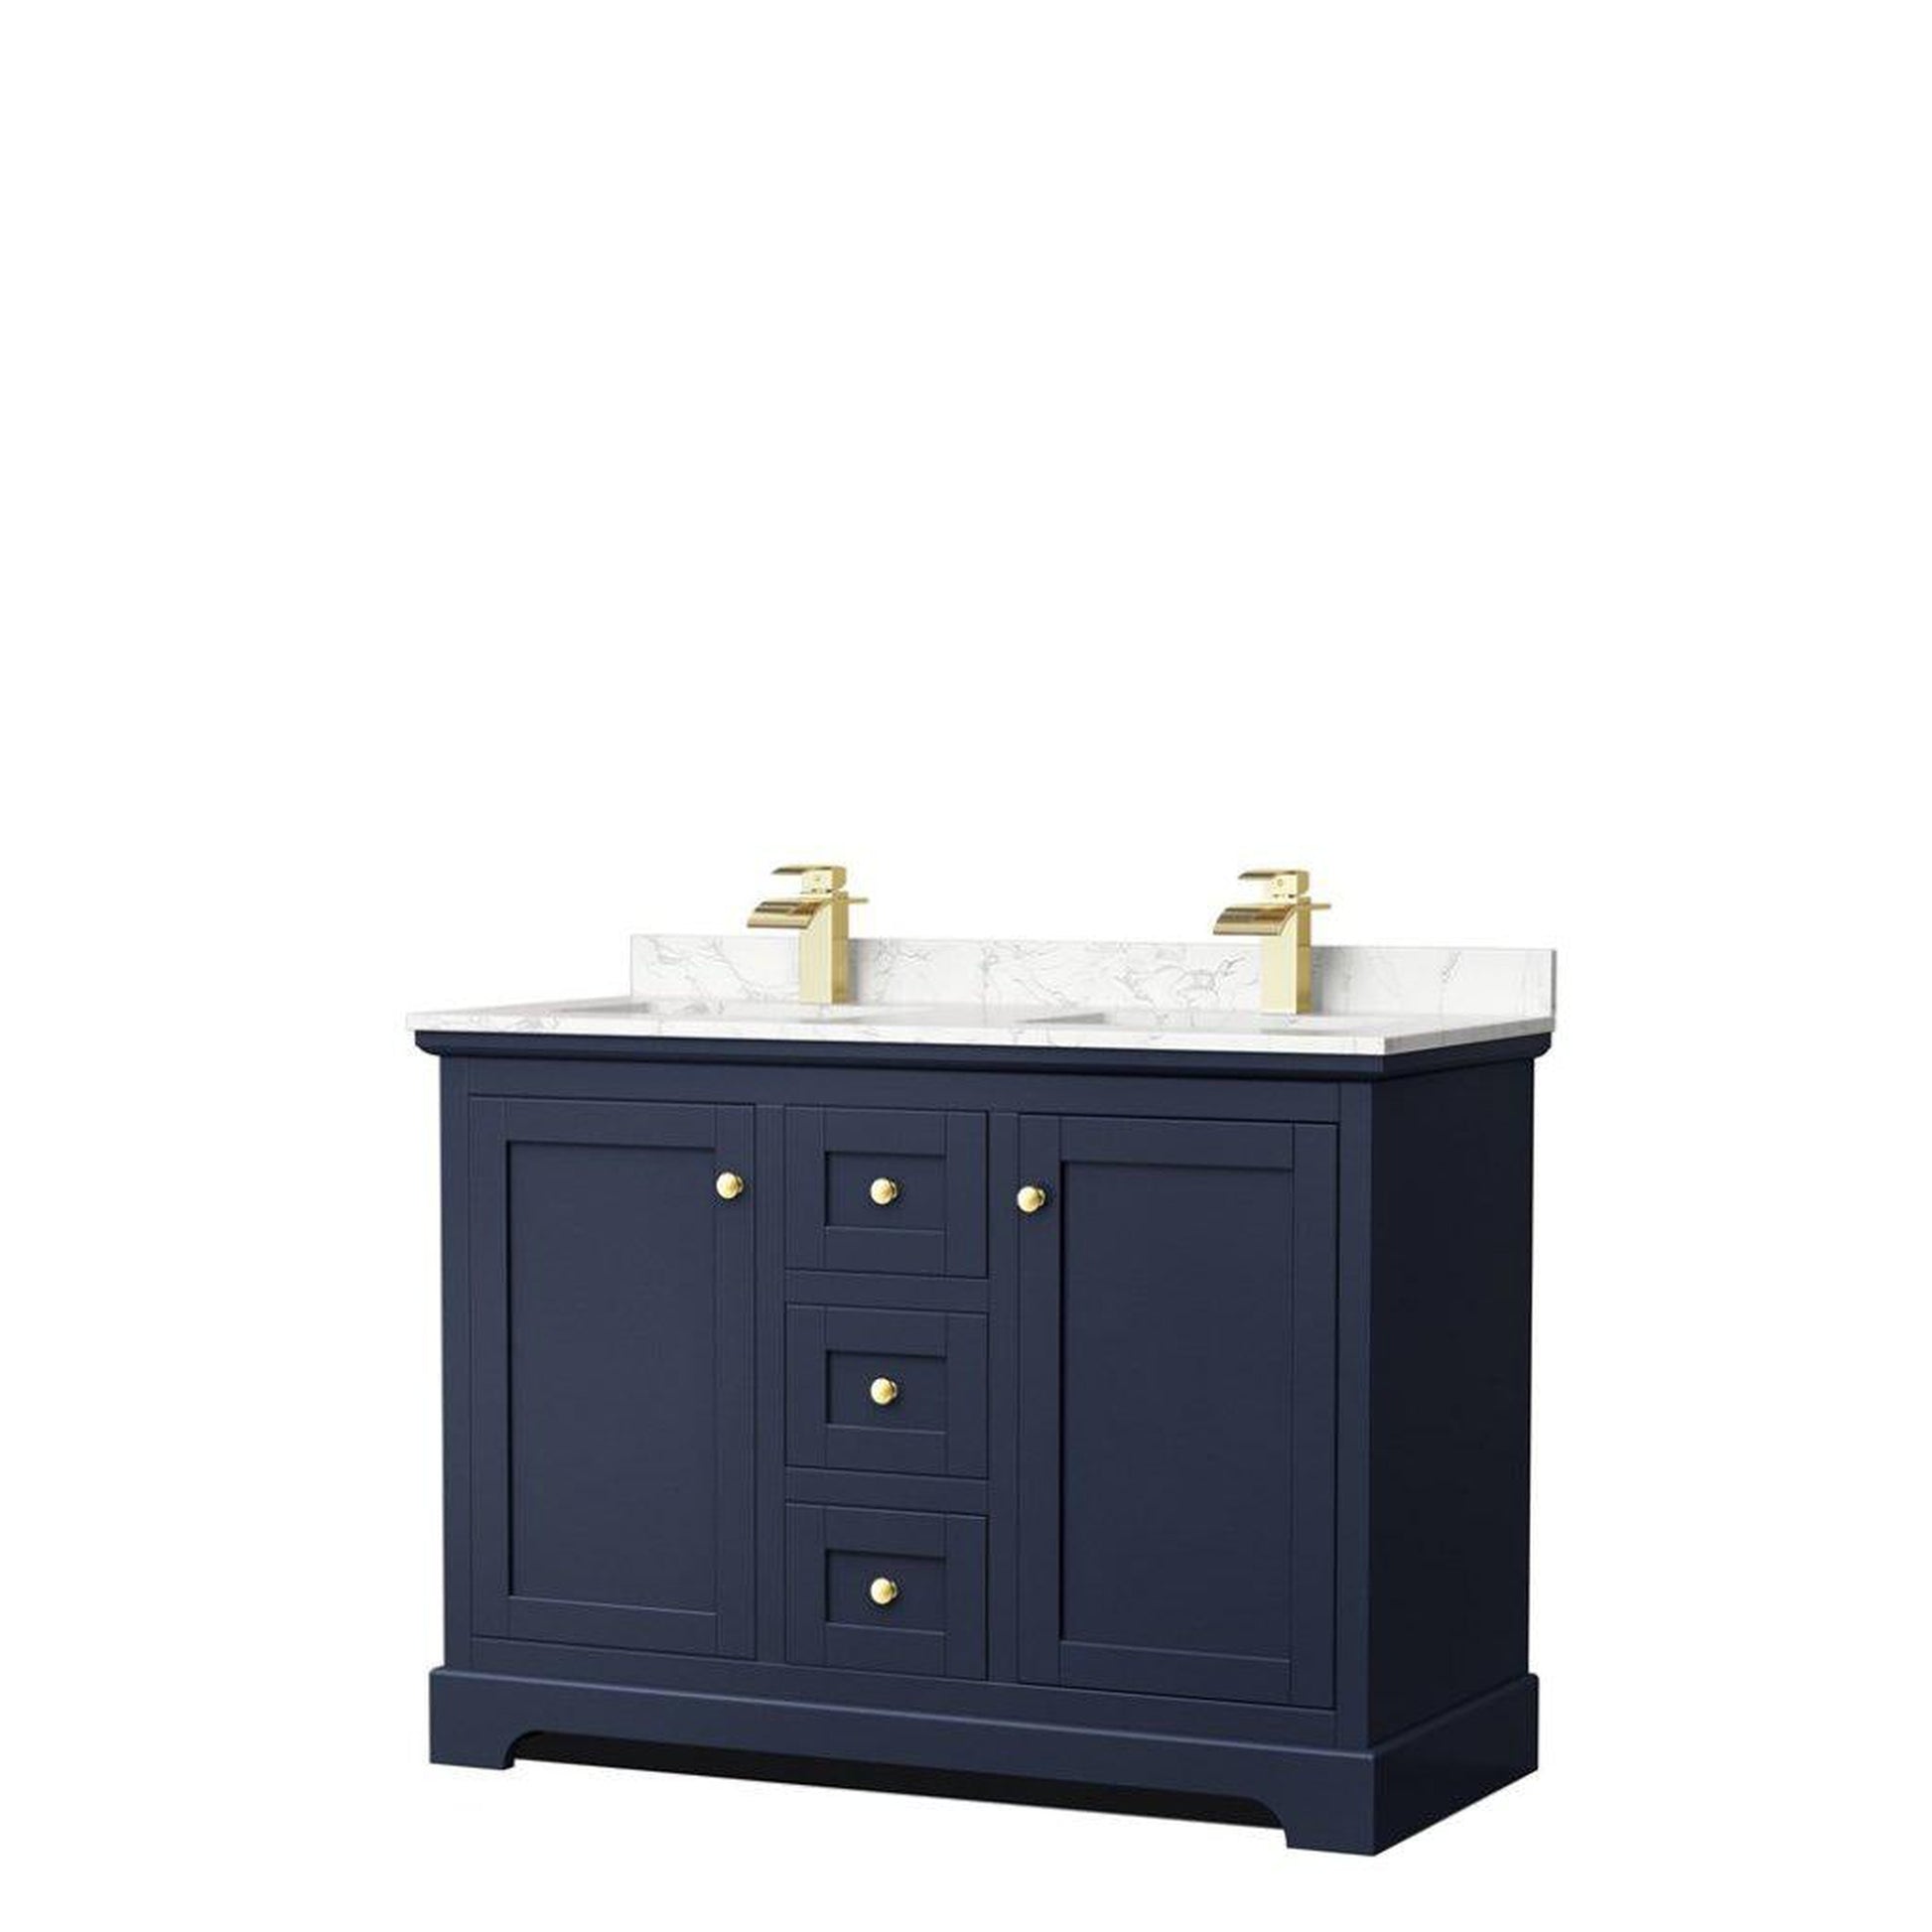 Wyndham Collection Avery 48" Dark Blue Double Bathroom Vanity With Dark-Vein Cultured Marble Countertop With 1-Hole Faucet And Square Sink